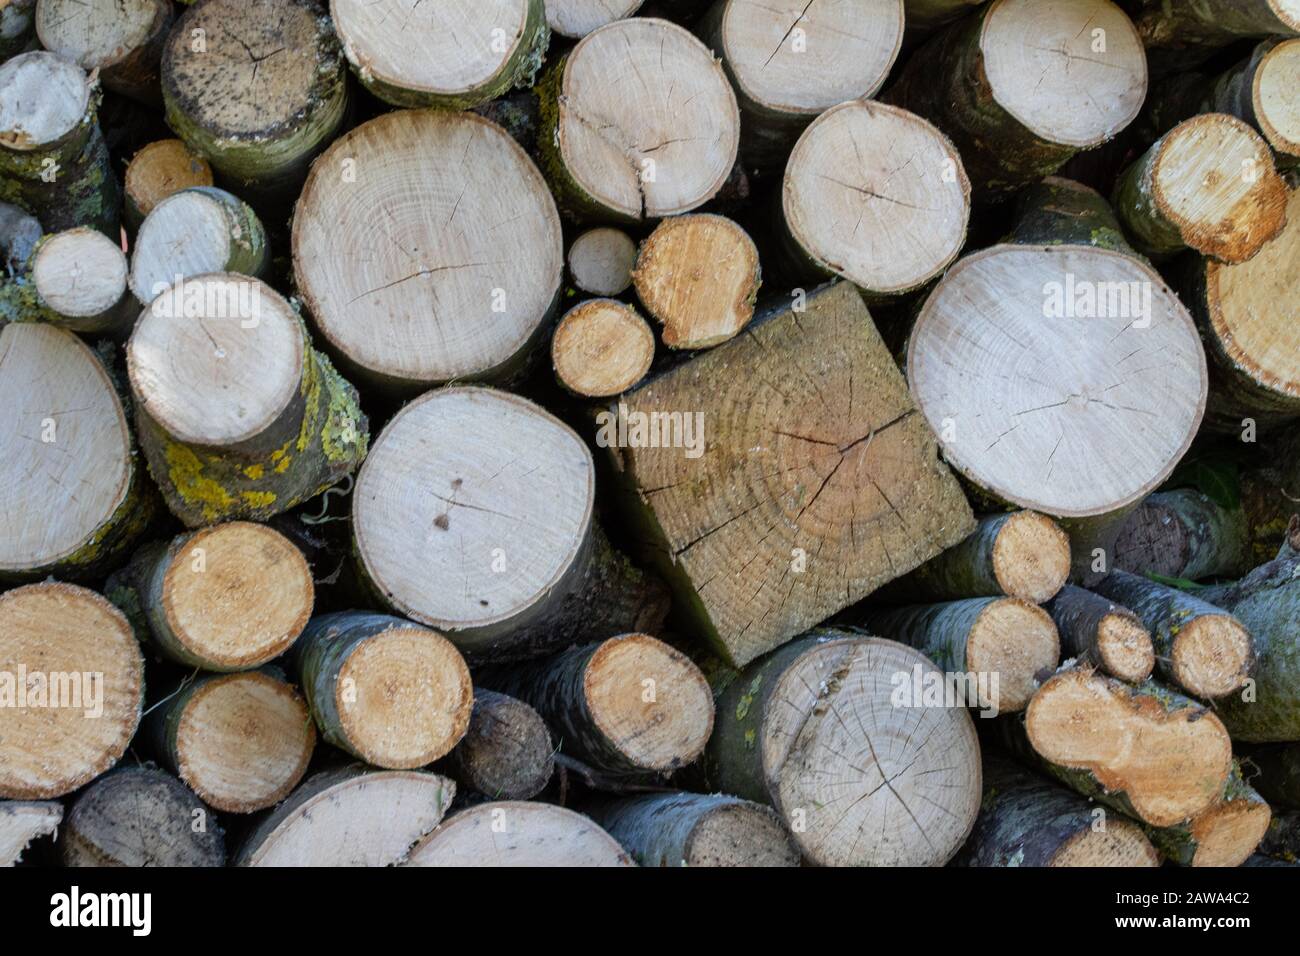 Square peg in a round hole Stock Photo